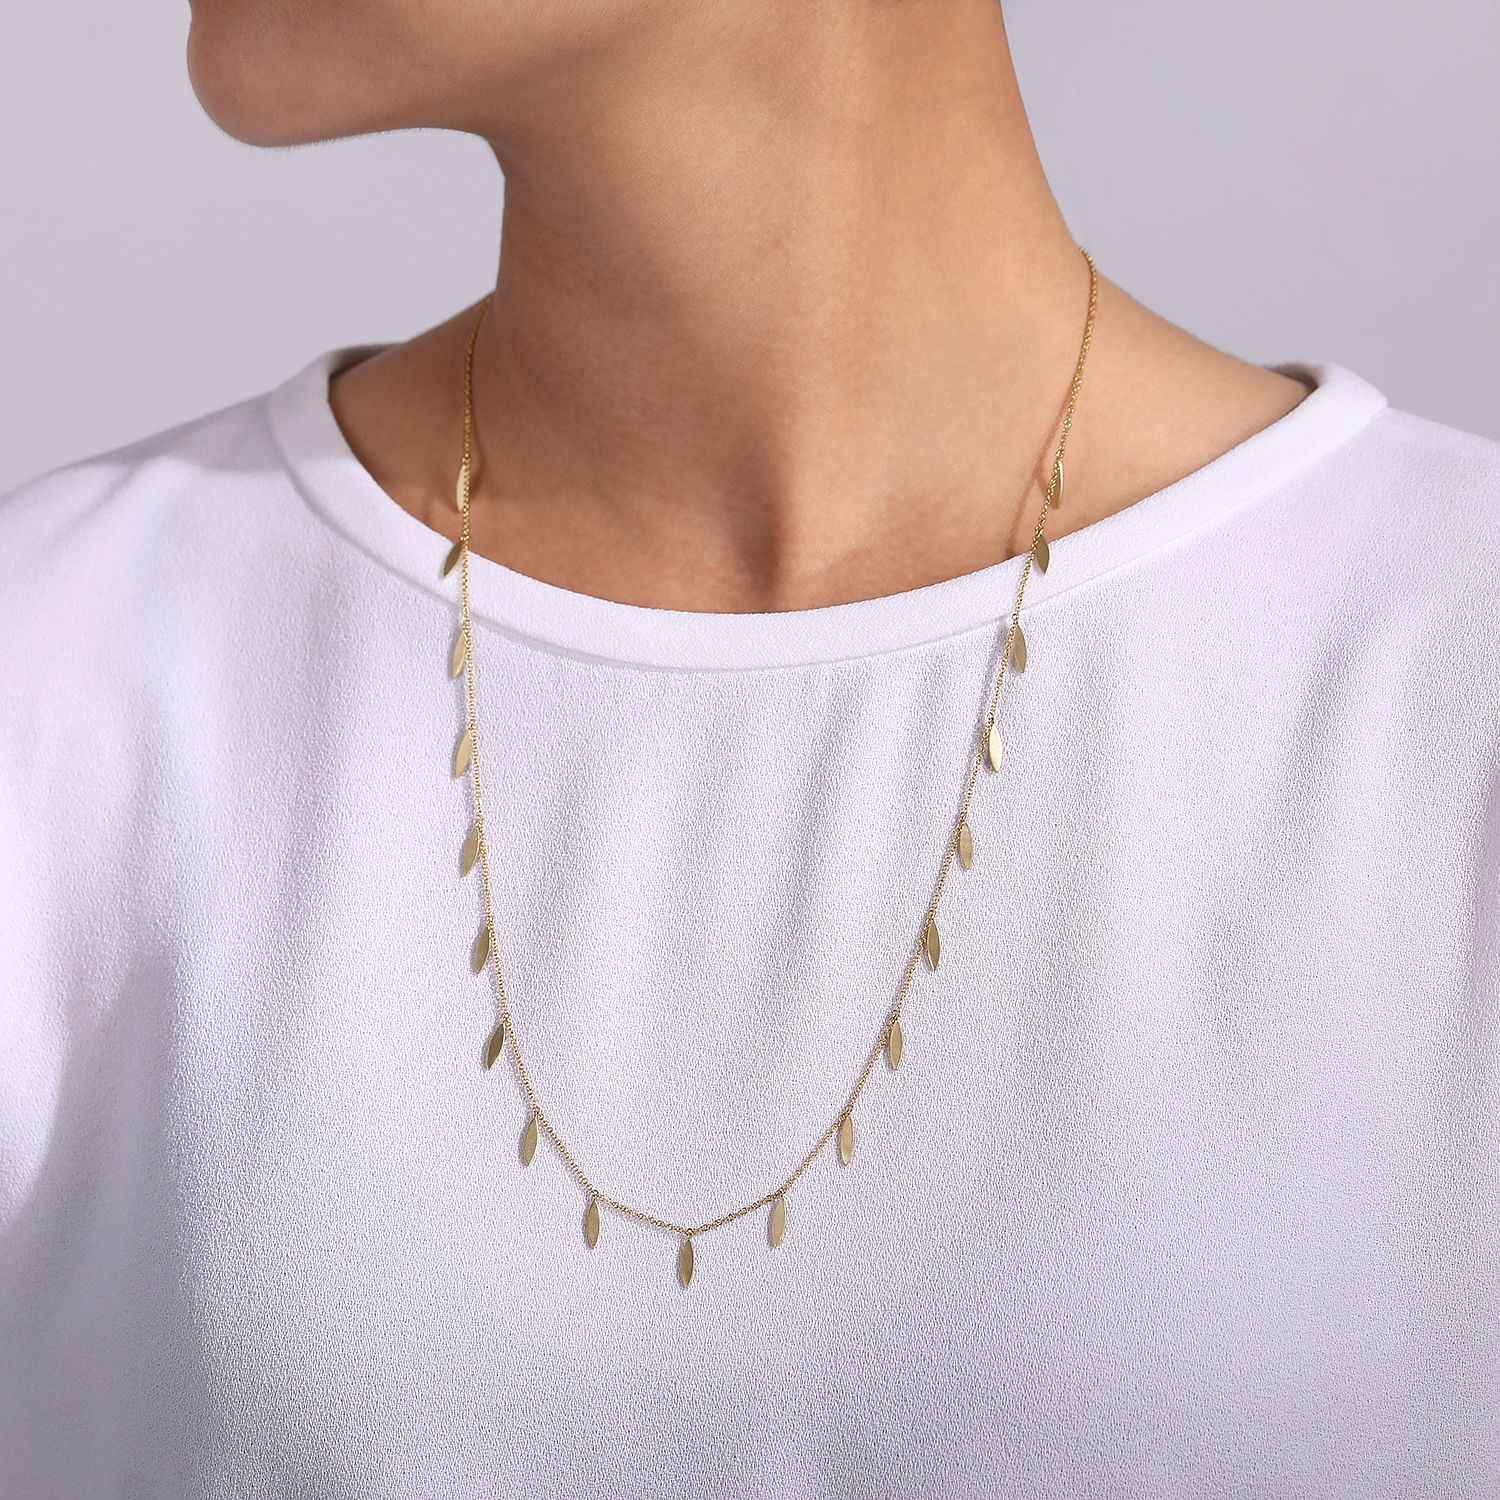 24 inch 14K Yellow Gold Chain Necklace with Marquise Shaped Drops